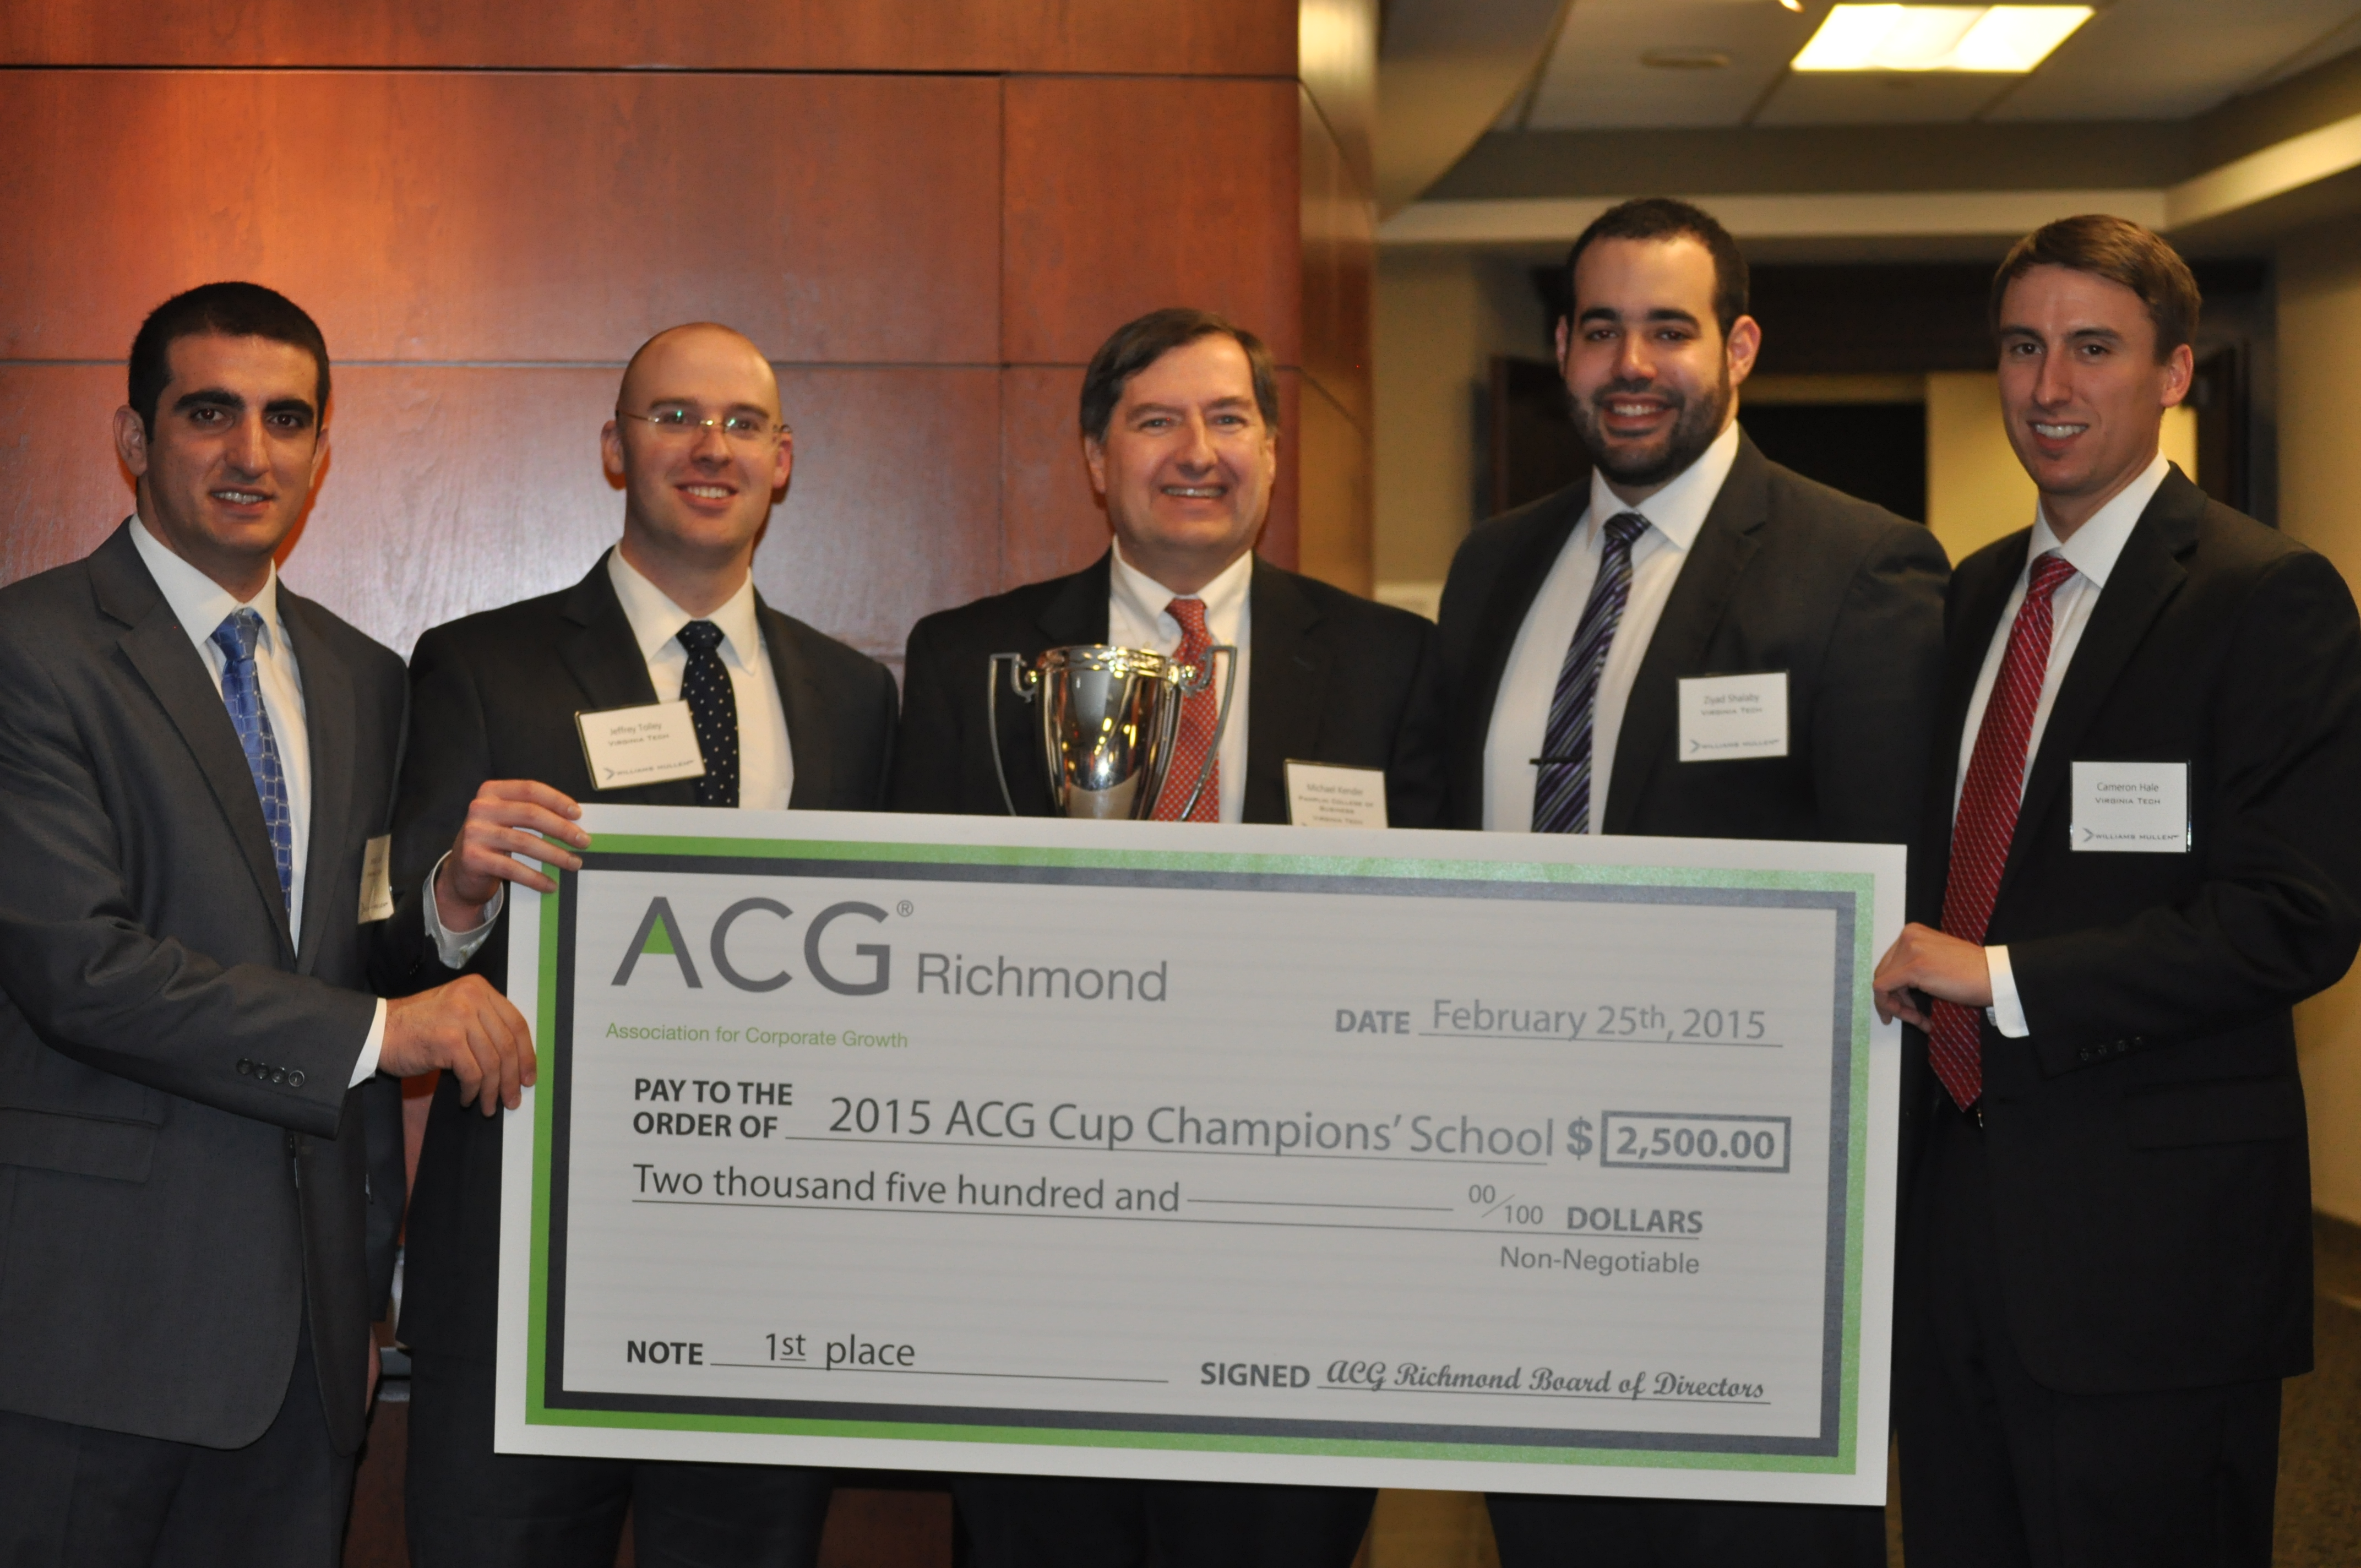 Finance professor Mike Kender (center) with Pamplin MBA students (from left to right) Ardian Daku, Jeffrey Tolley, Ziyad Shalaby and Cameron Hale with the ACG trophy and check.